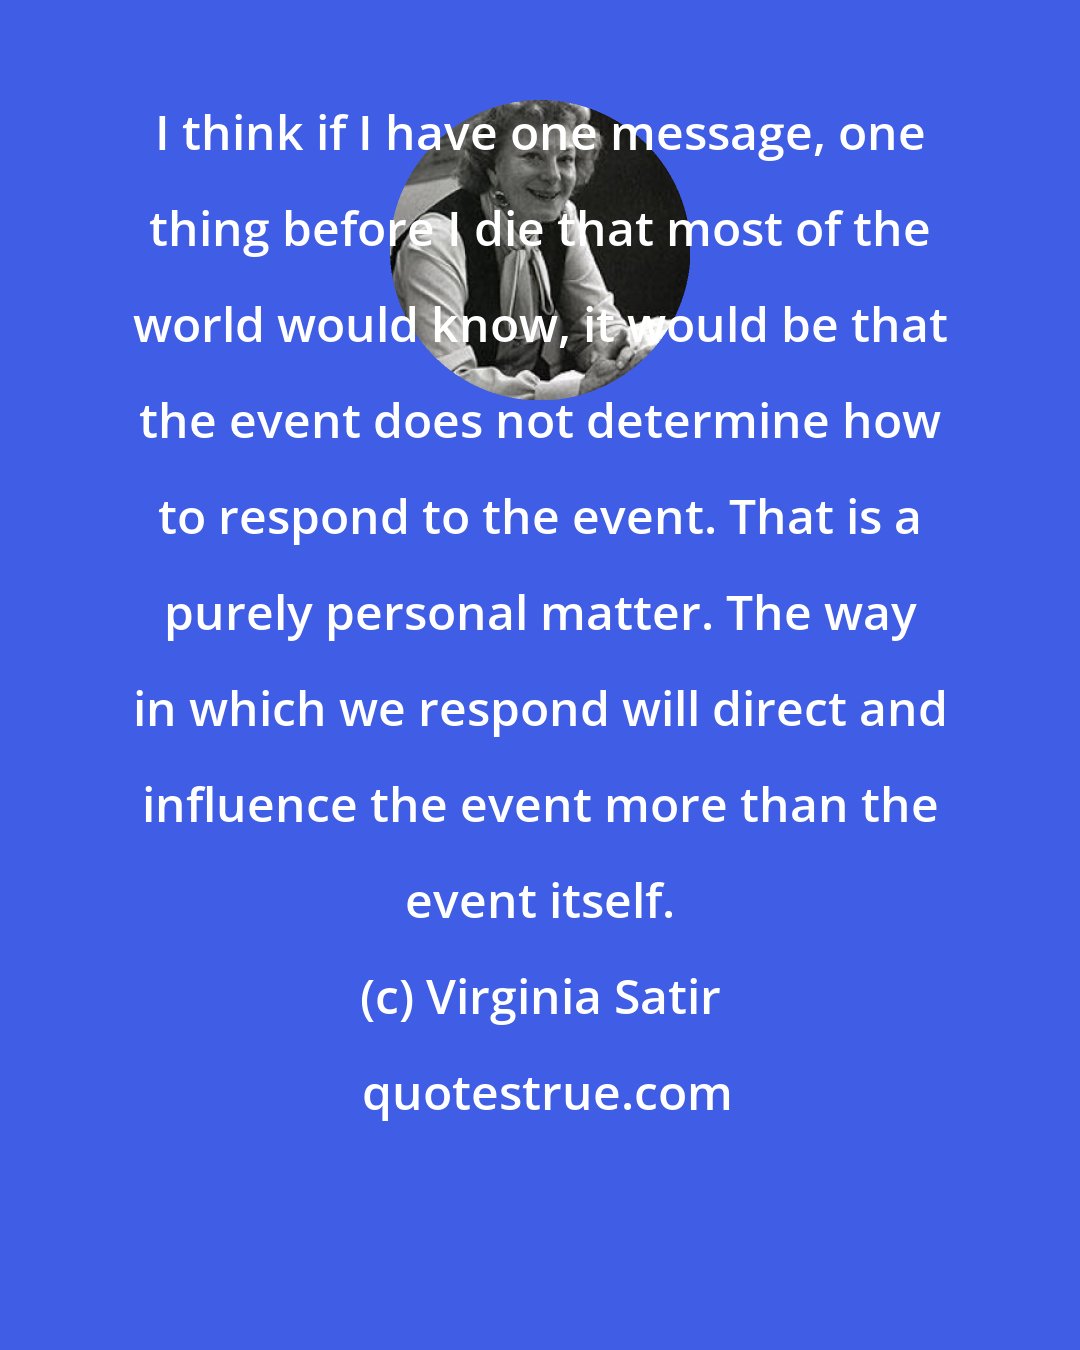 Virginia Satir: I think if I have one message, one thing before I die that most of the world would know, it would be that the event does not determine how to respond to the event. That is a purely personal matter. The way in which we respond will direct and influence the event more than the event itself.